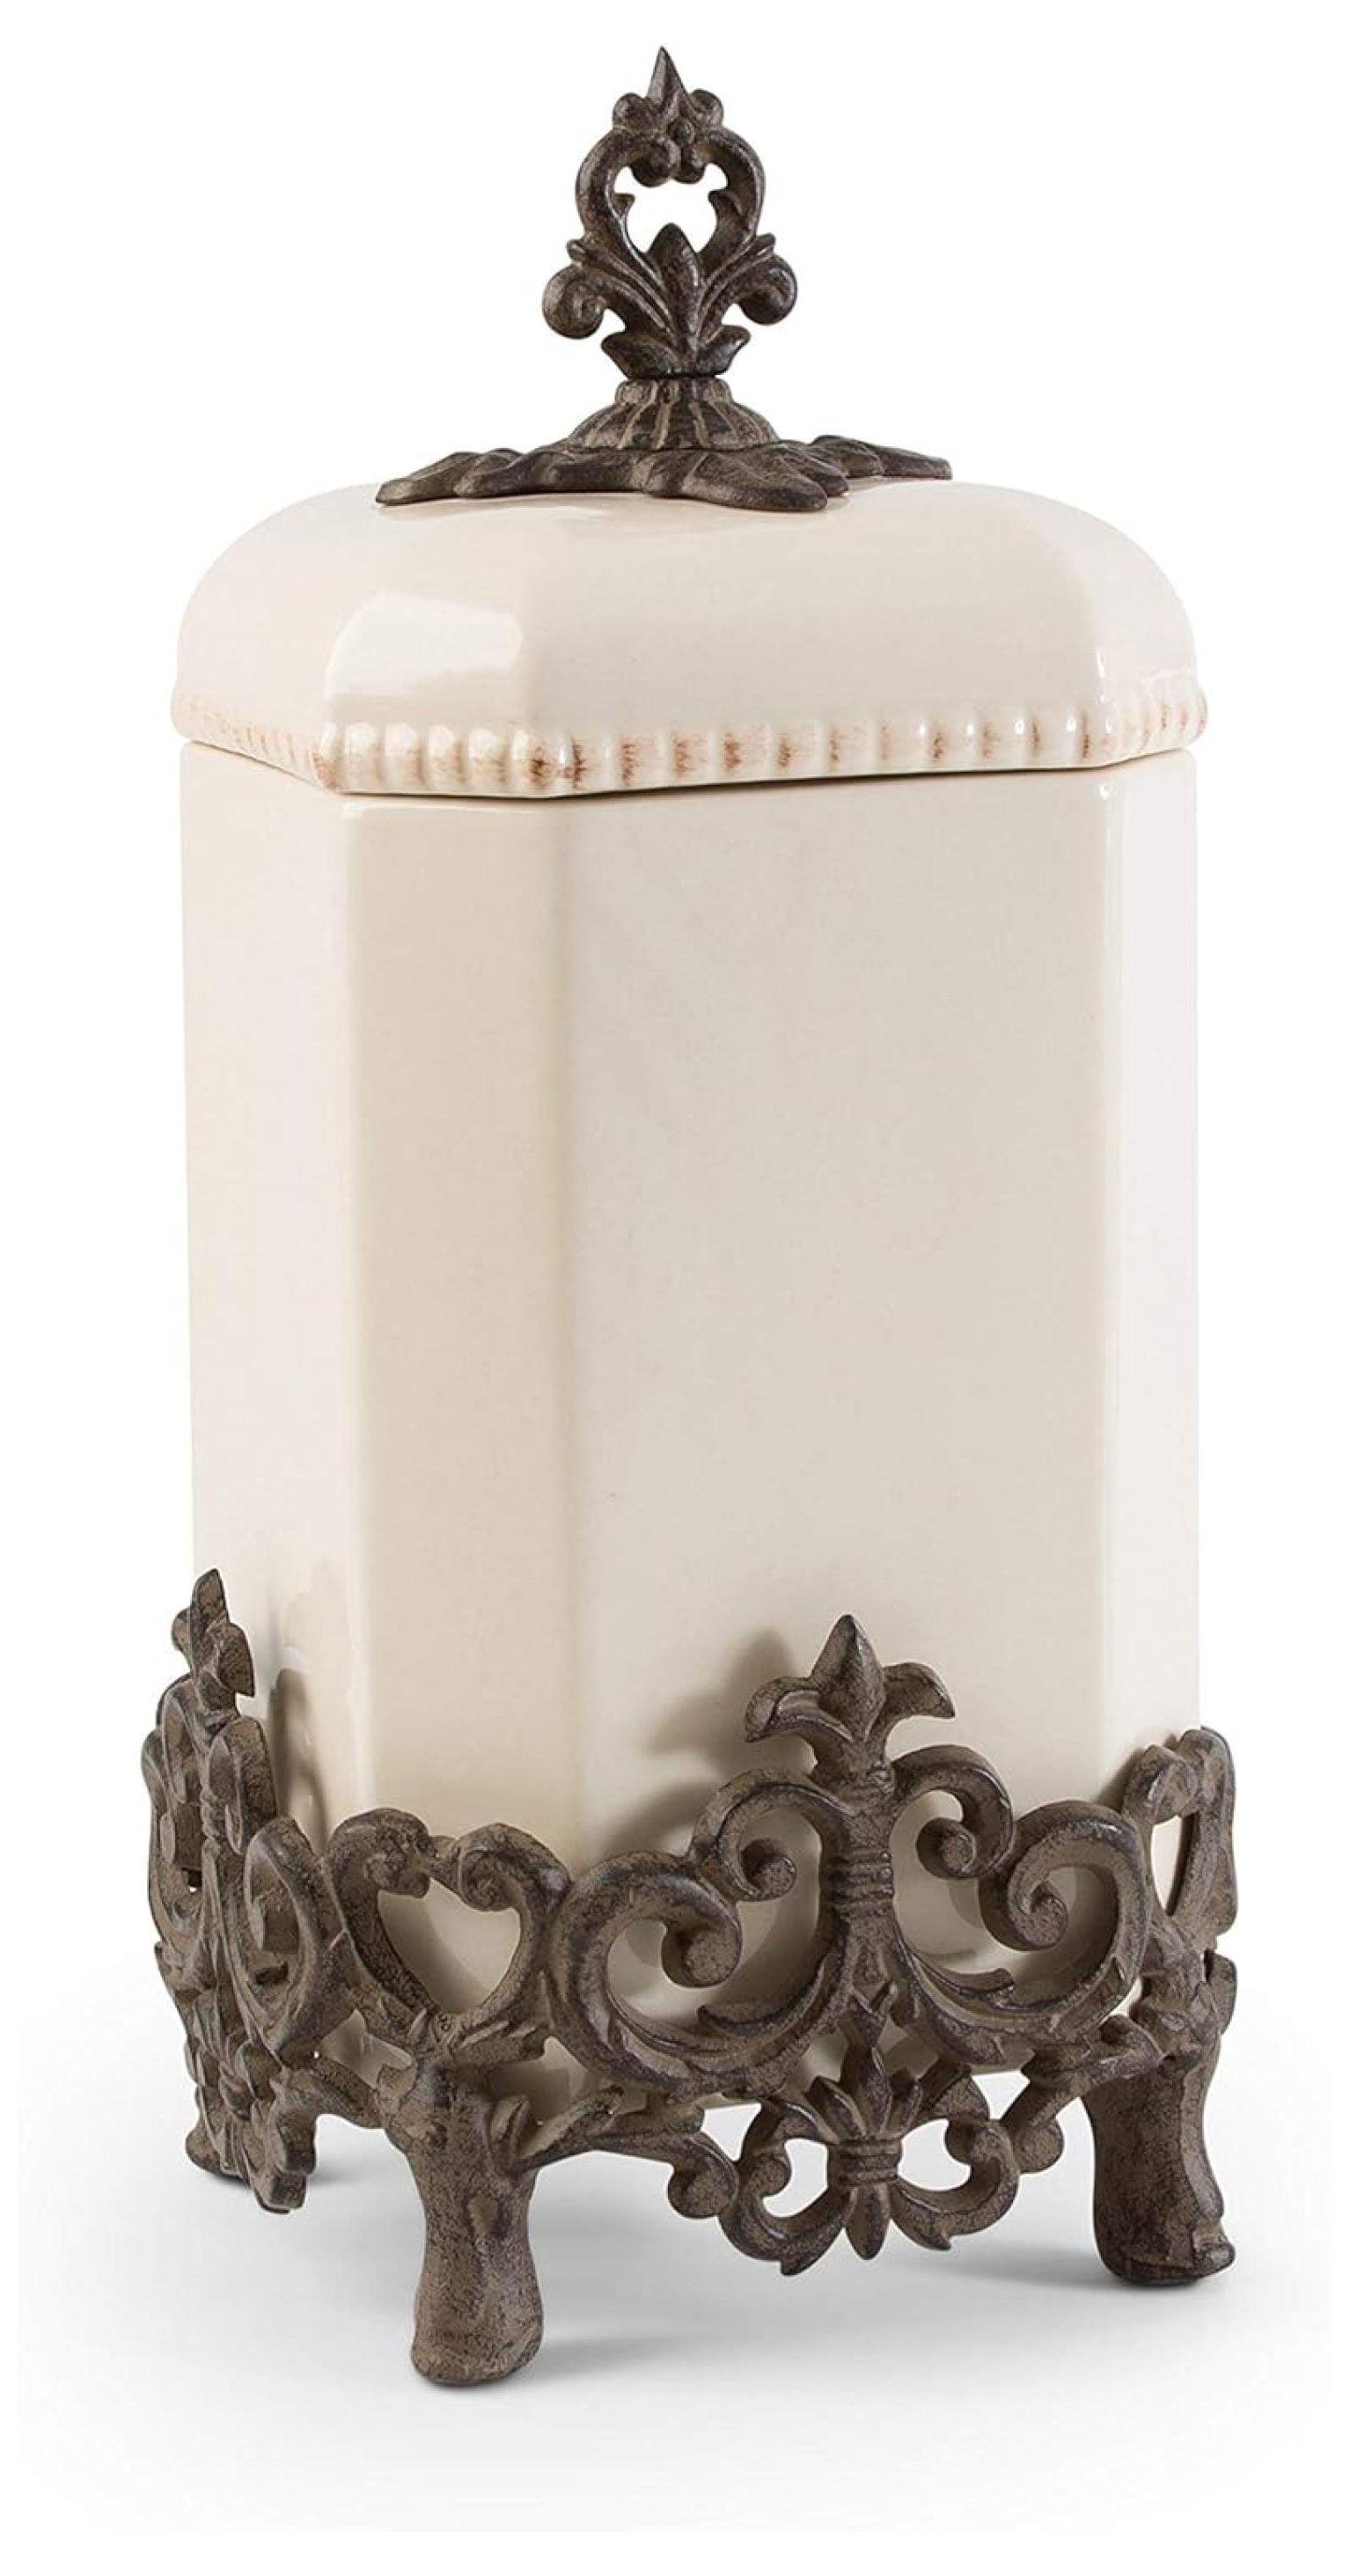 Provencial Cream 16" Ceramic Canister with Brown Metal Base